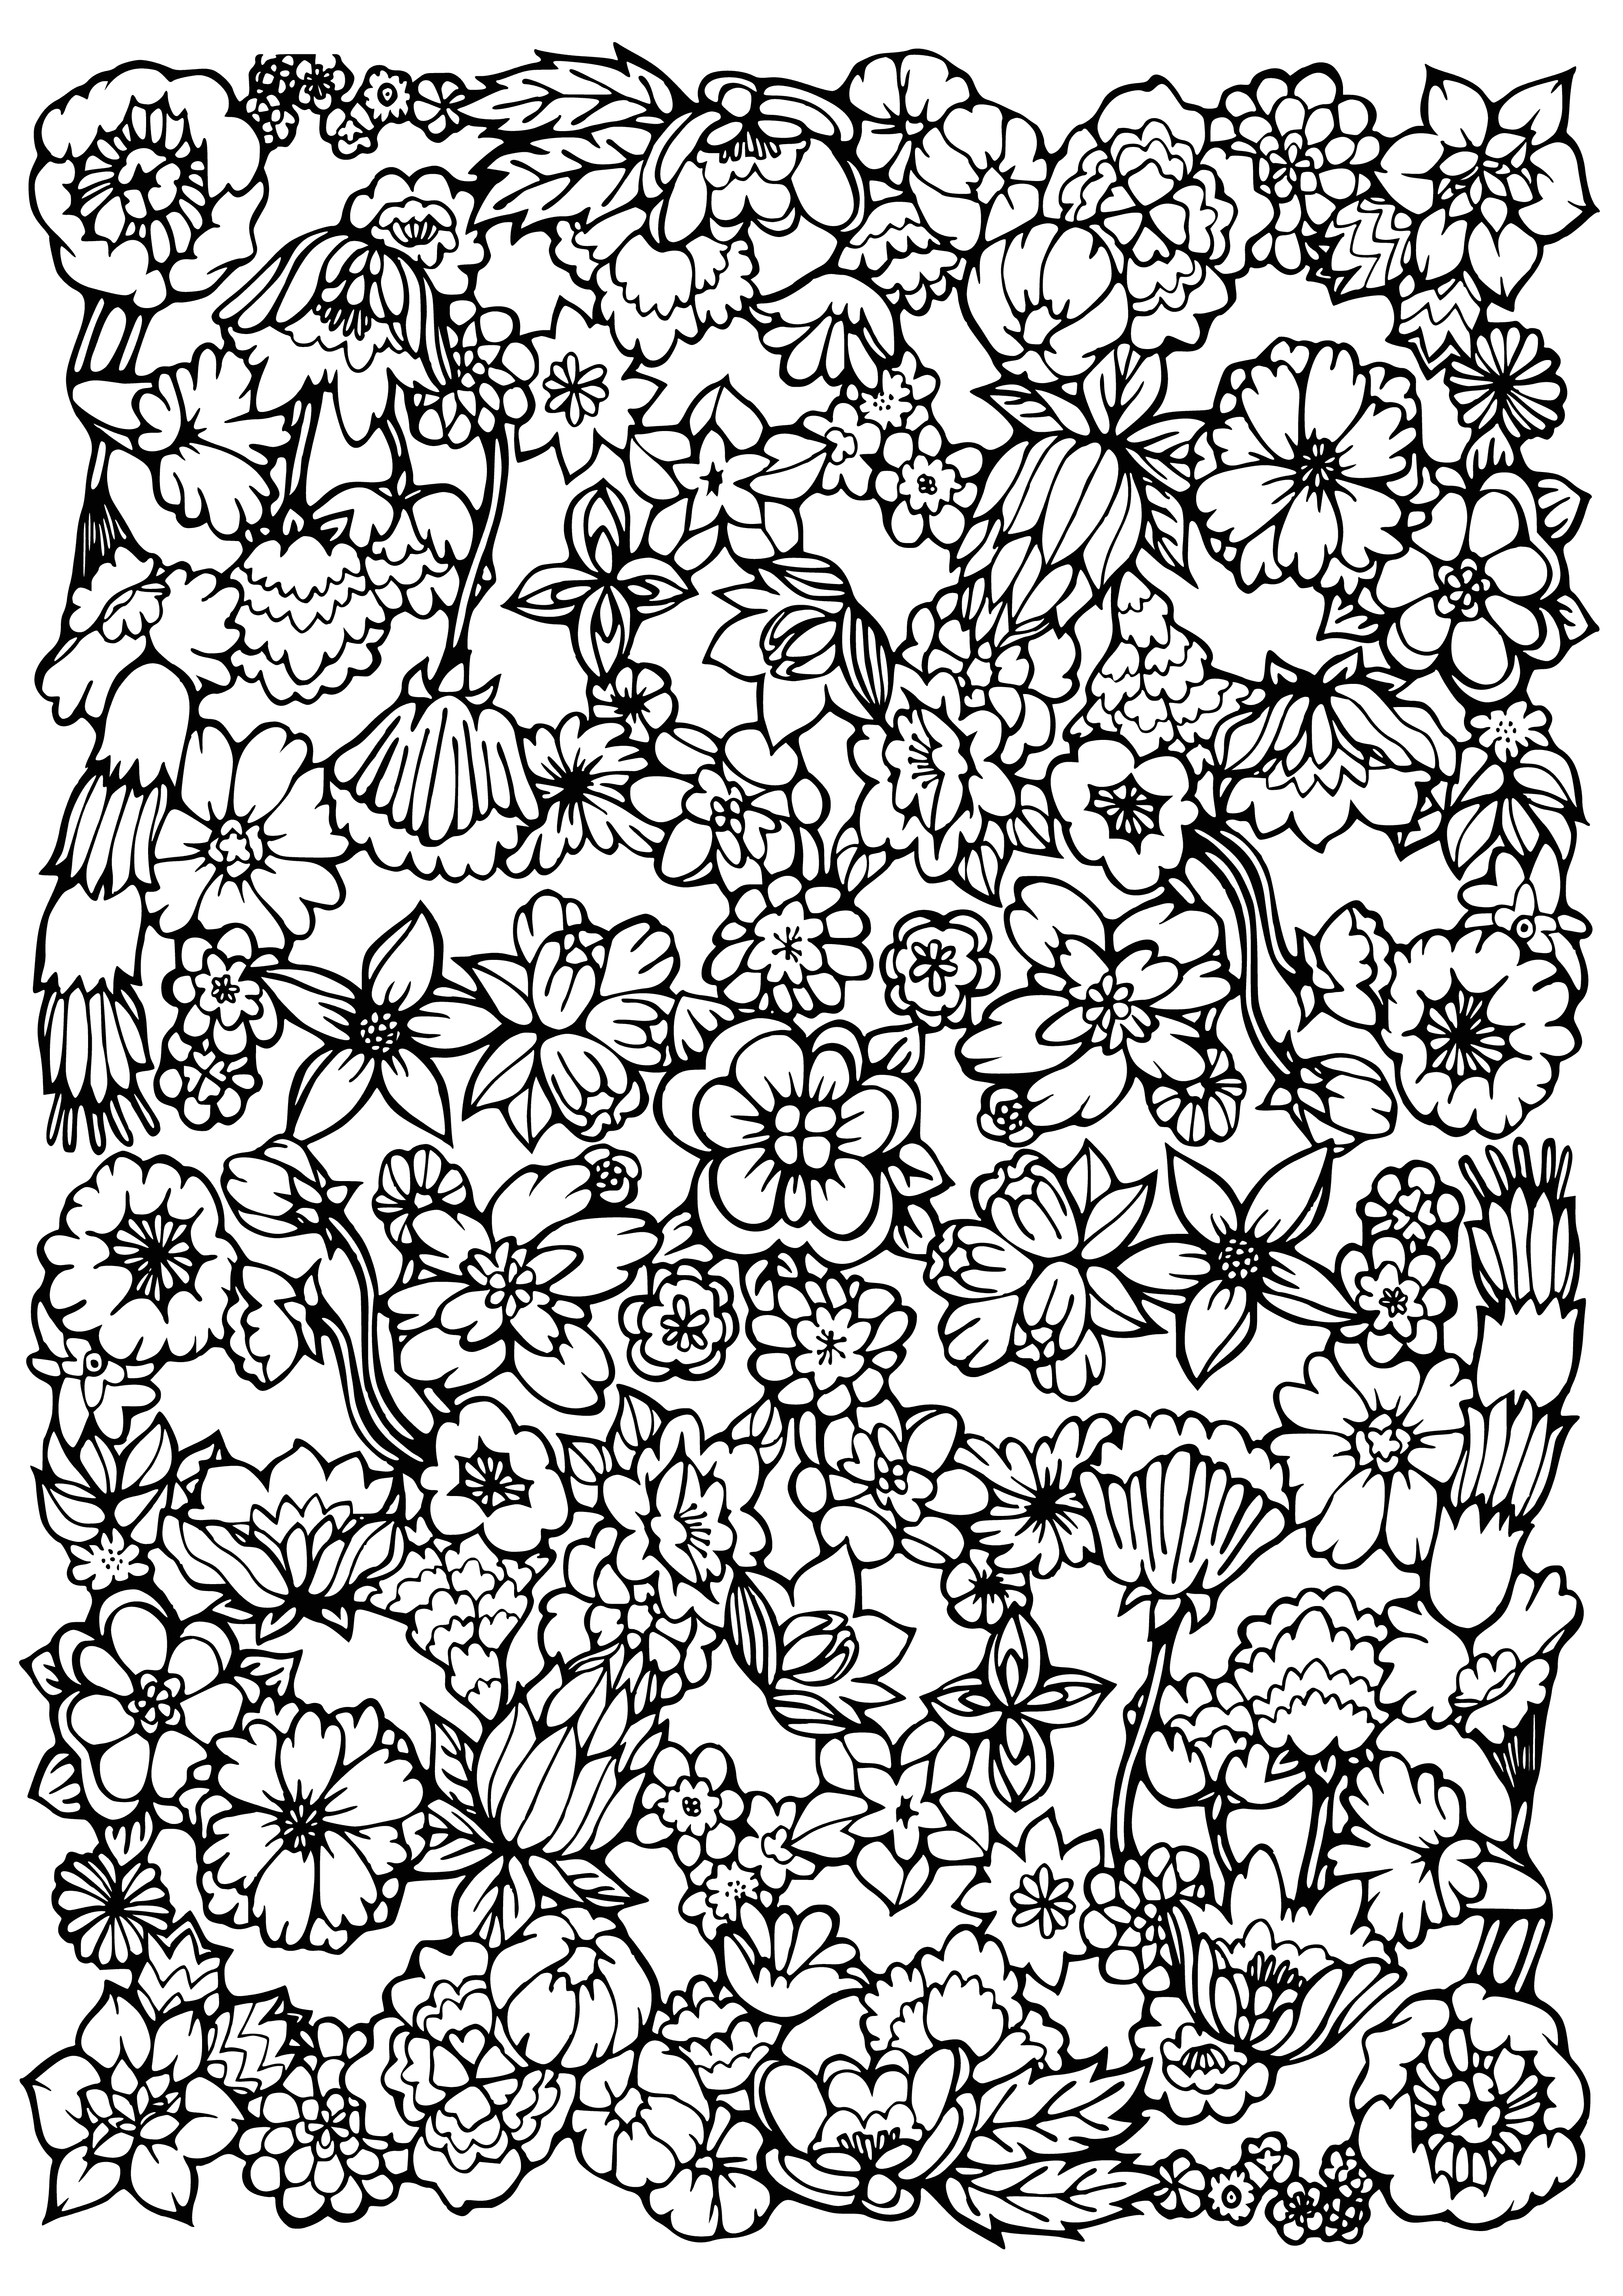 coloring page: Assorted flowers blooming with bees, petals of different colors, yellow centers, green grass, blue sky--this coloring page has it all! #coloring #flowers